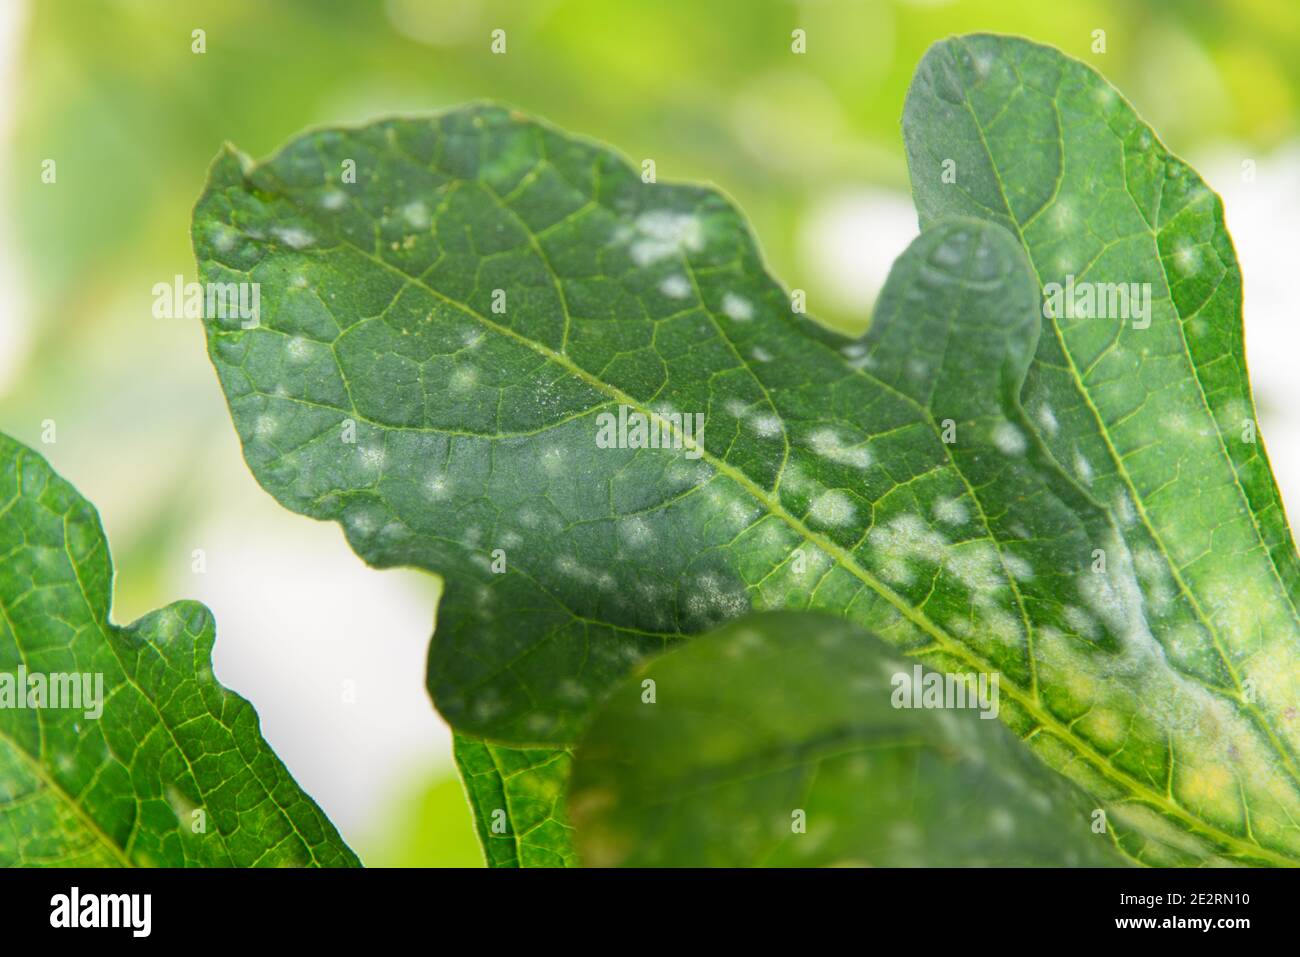 Melon green leaf has Destroyed by Powdery mildew of melon Stock Photo